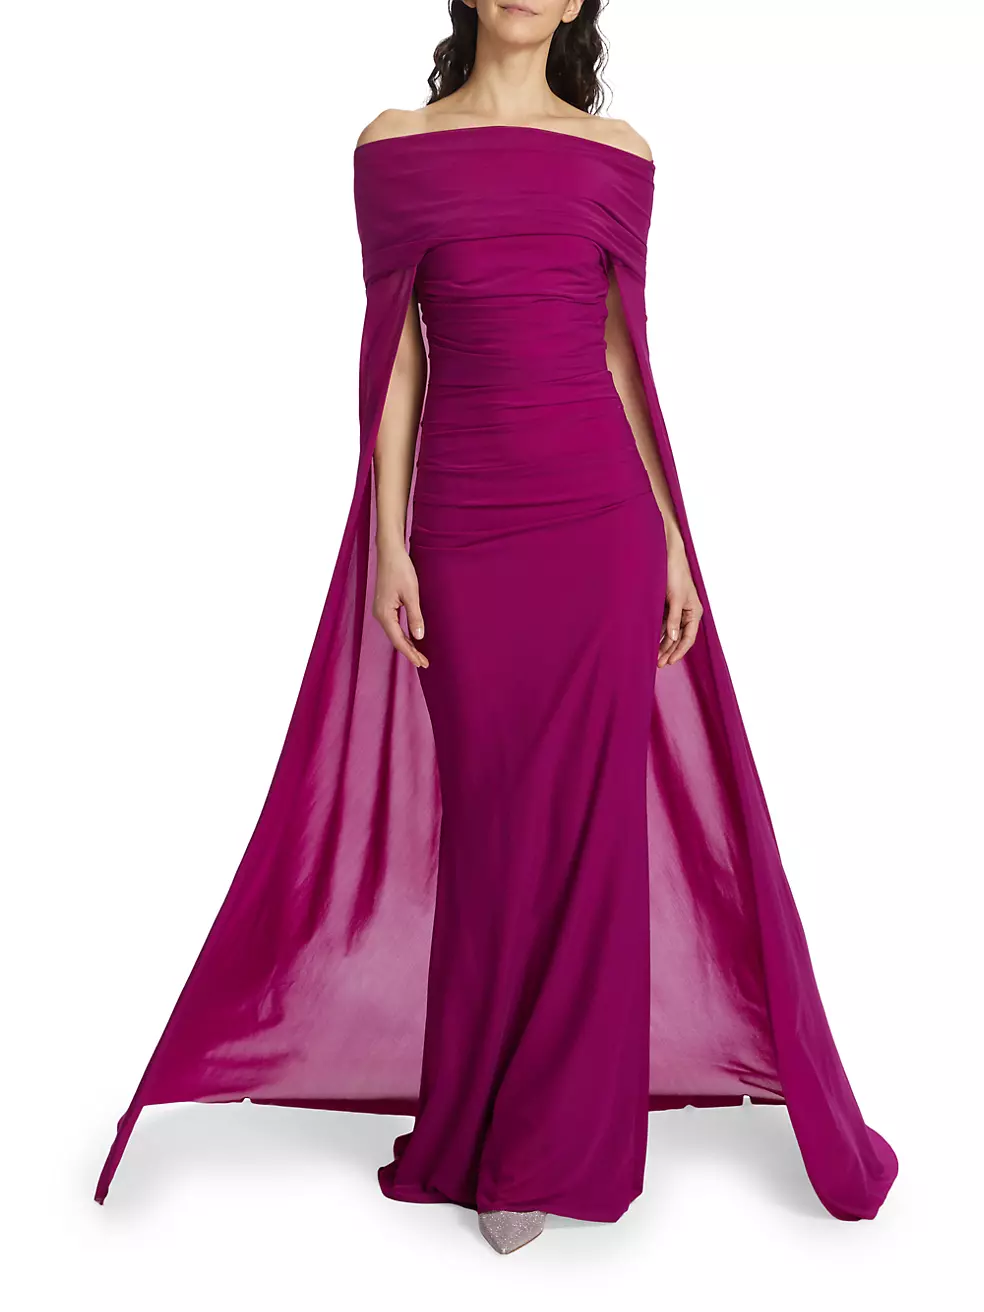 Shop Talbot Runhof Stretch-Tulle Cape Gown | Saks Fifth Avenue